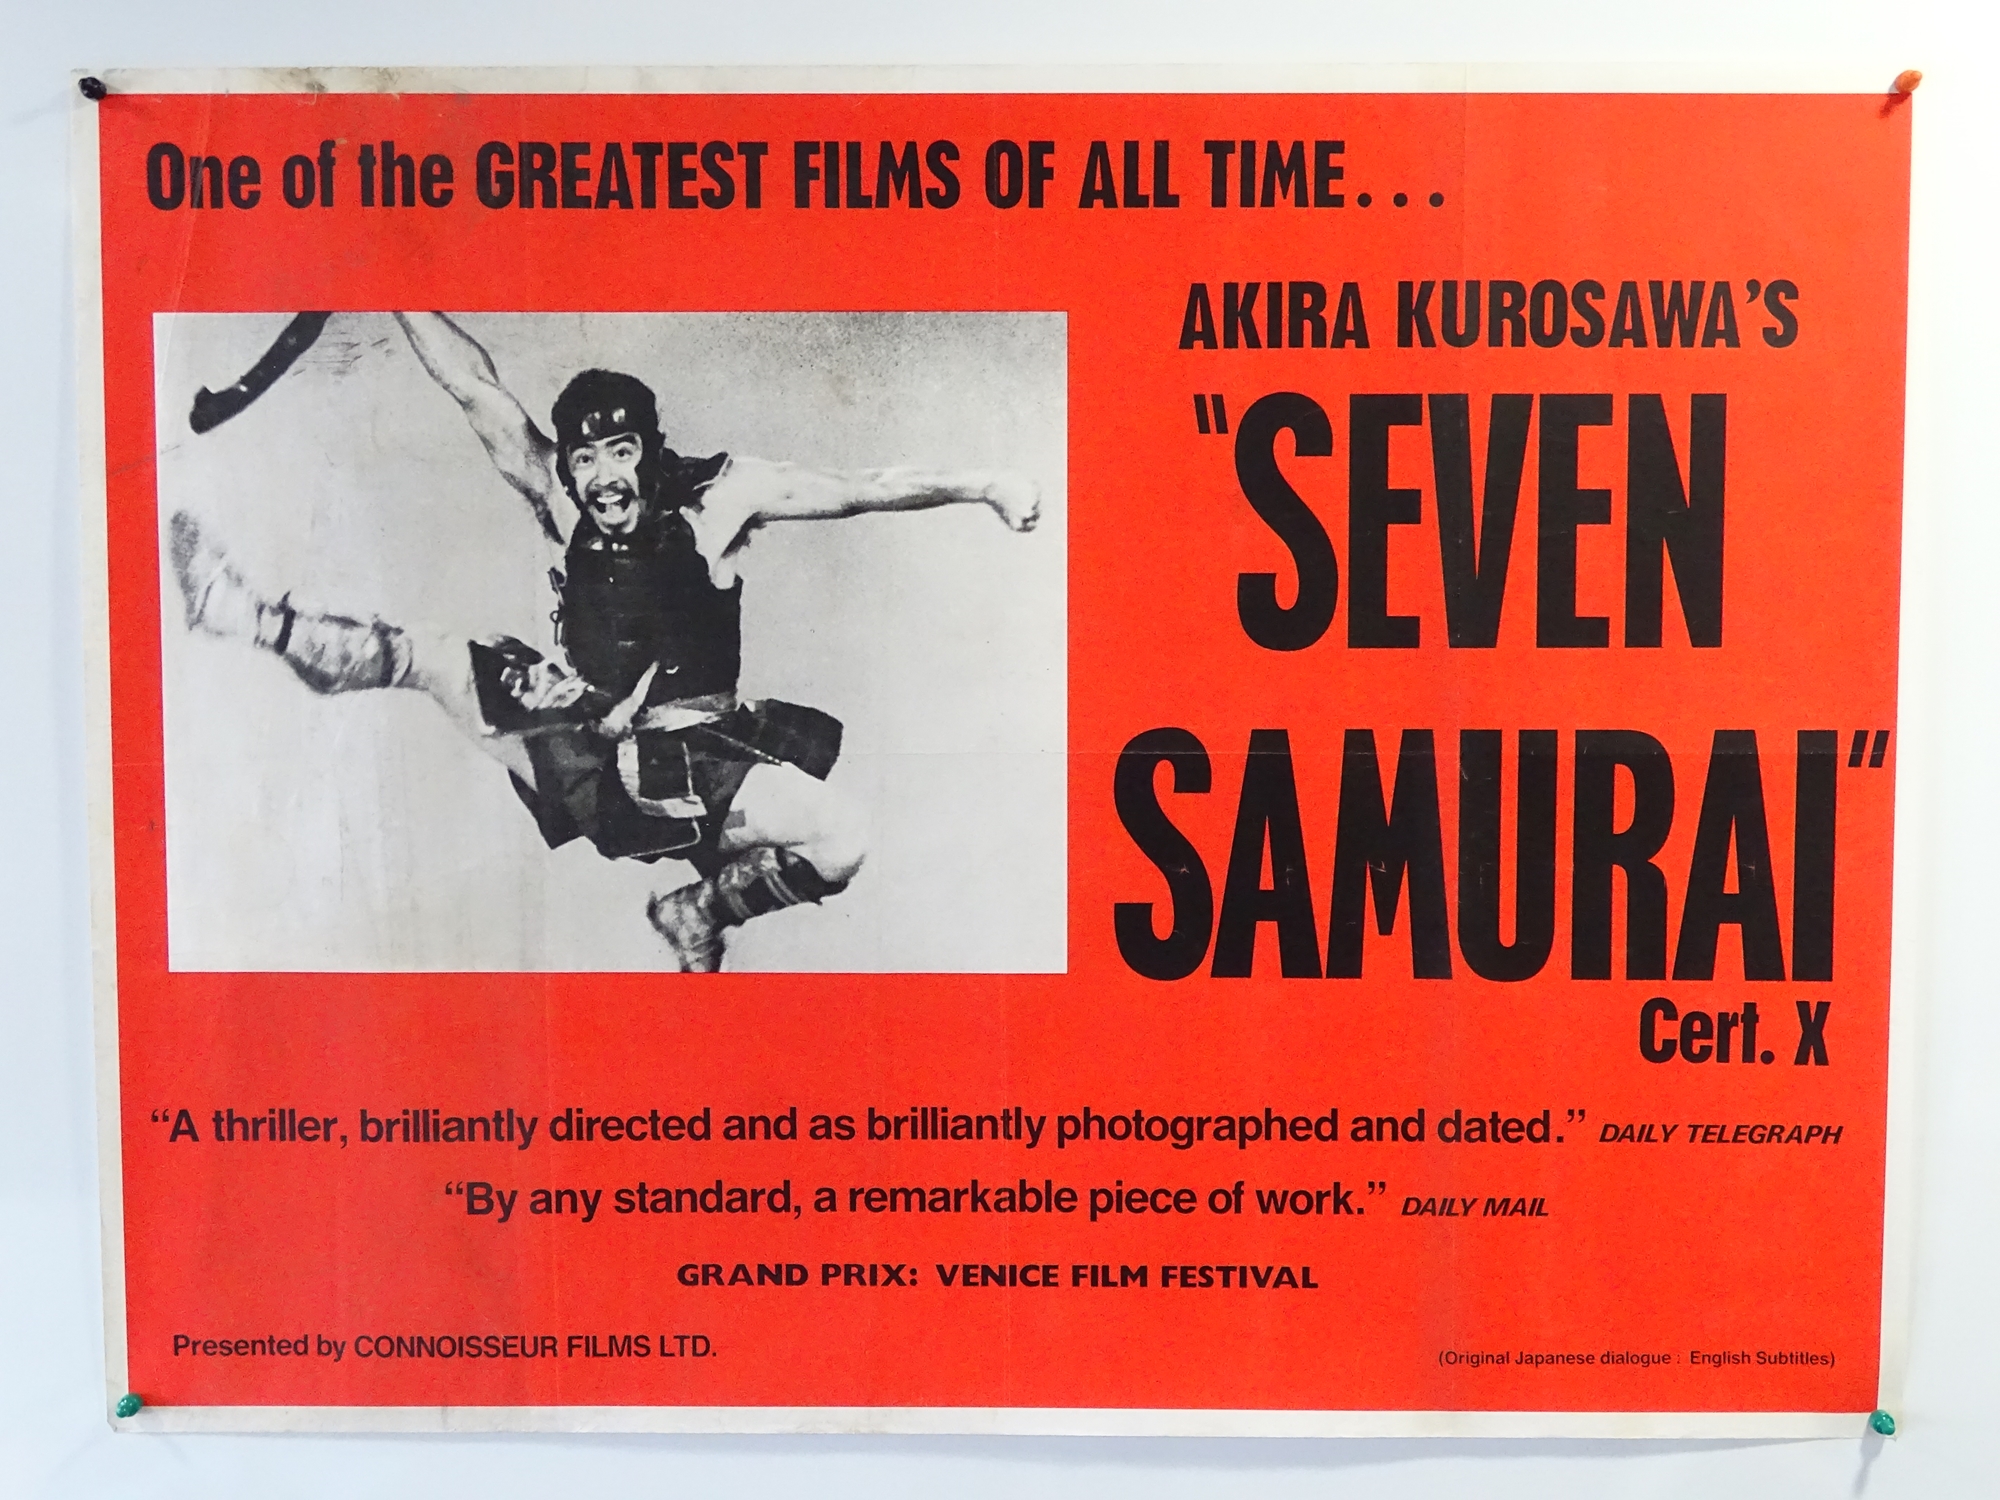 SEVEN SAMURAI (1954 - 1960s re-release) - UK Quad film poster - rolled, previously folded